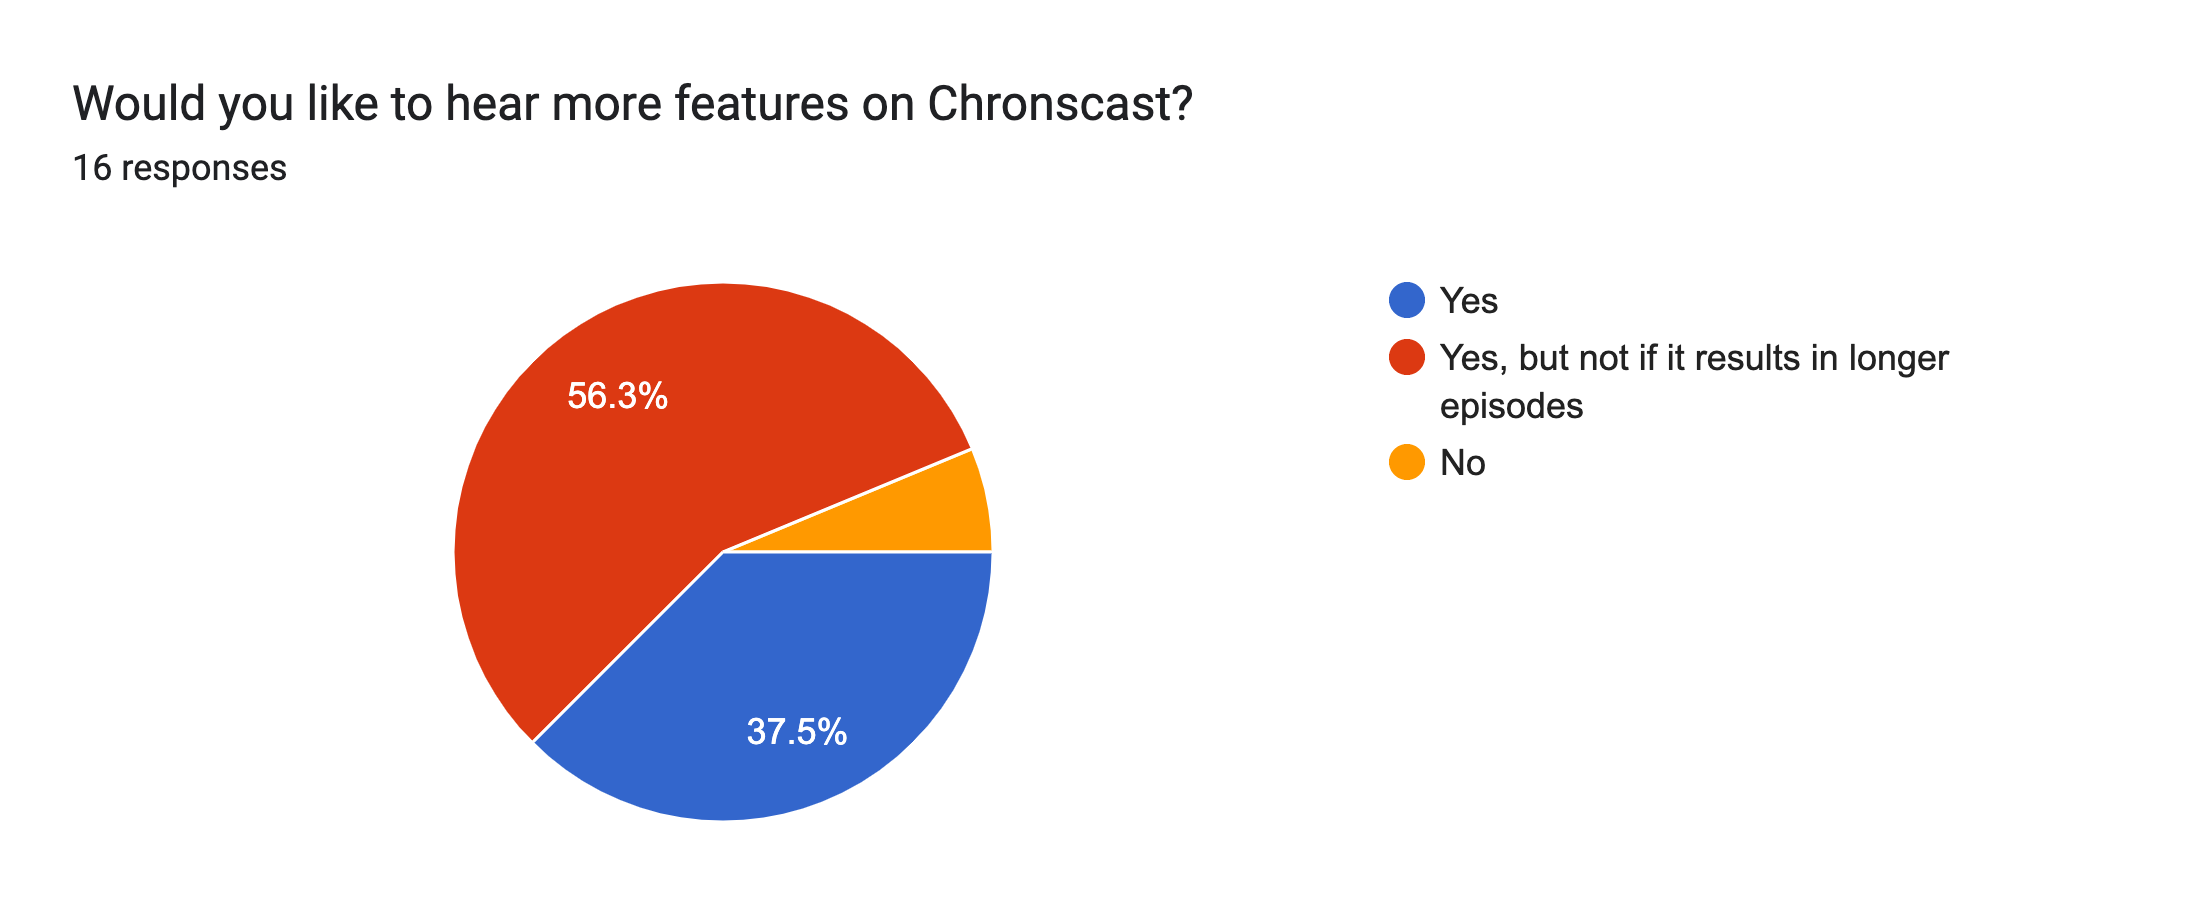 Forms response chart. Question title: Would you like to hear more features on Chronscast?. Number of responses: 16 responses.